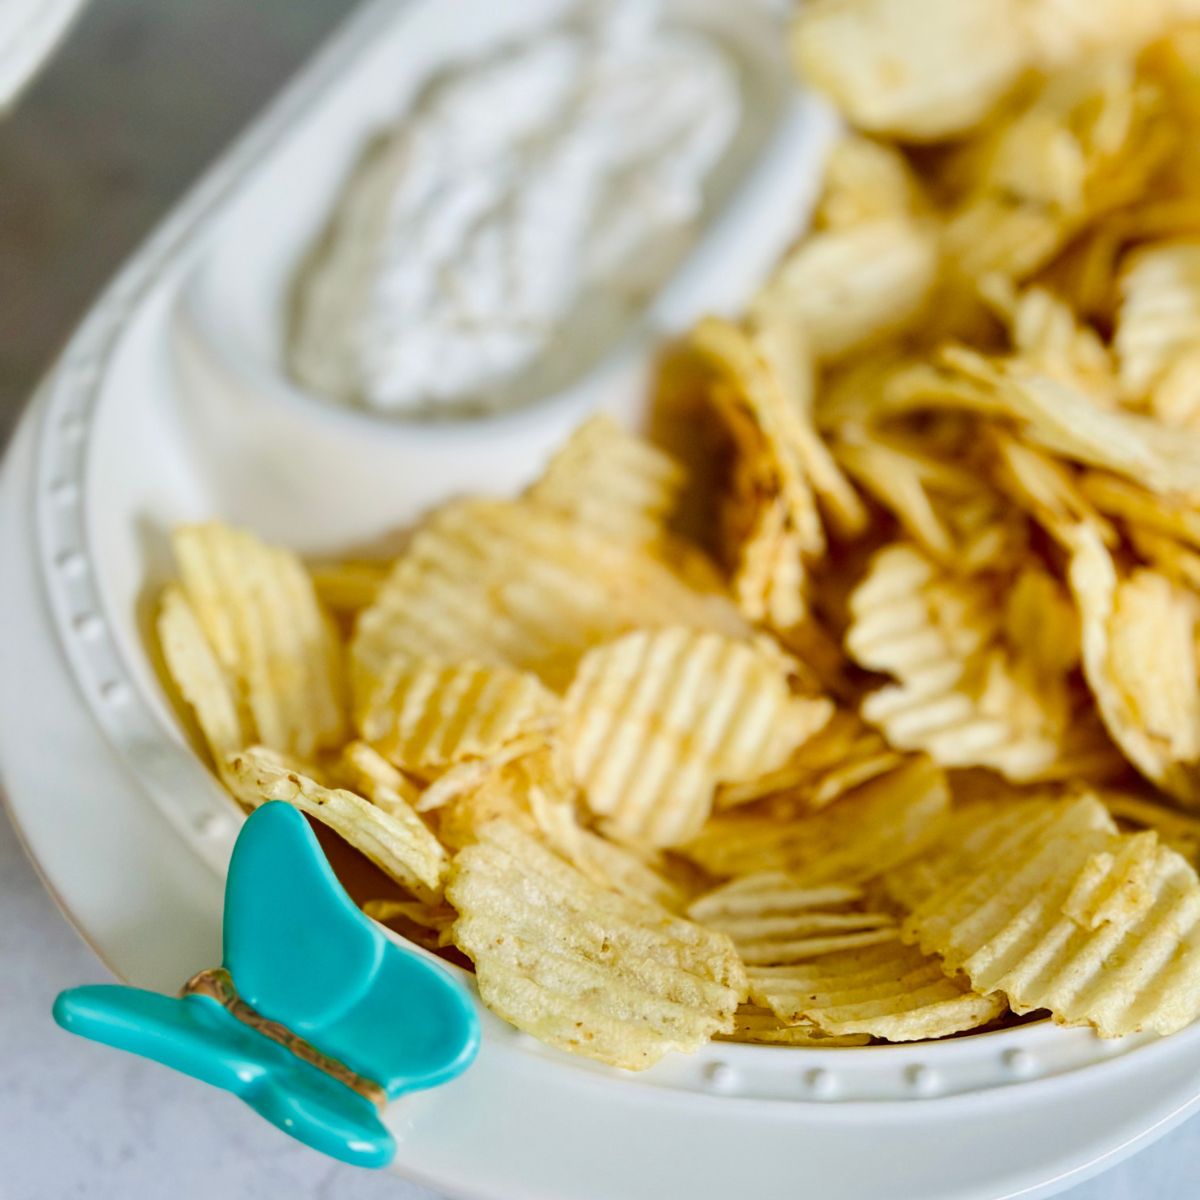 A bowl of potato chips with a creamy dip on the side.